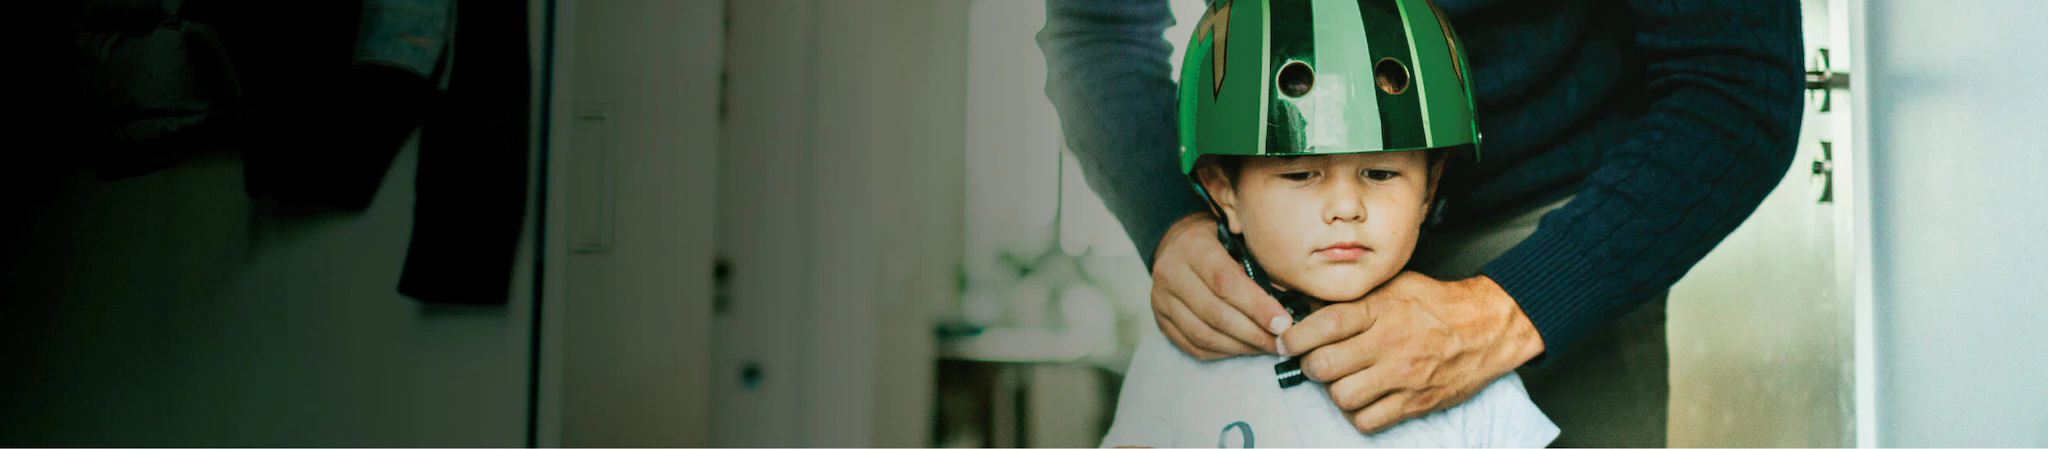 father fastens the strap of green color helmet around his son's head while the son observes